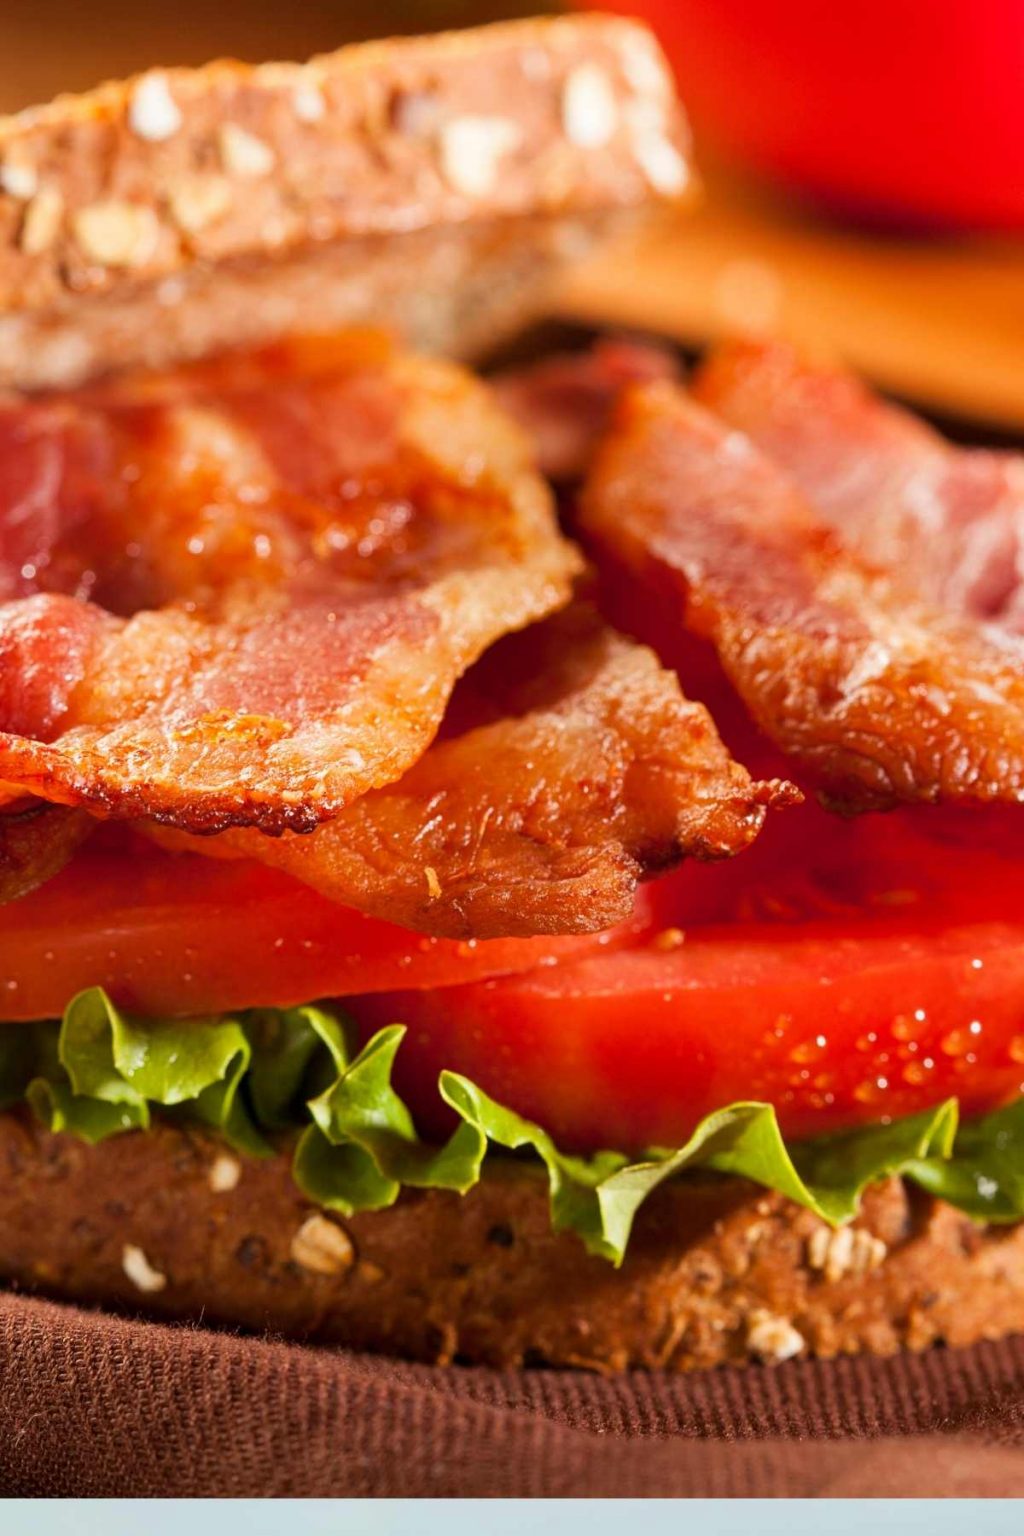 Southern Tomato Sandwich with Bacon and Lettuce